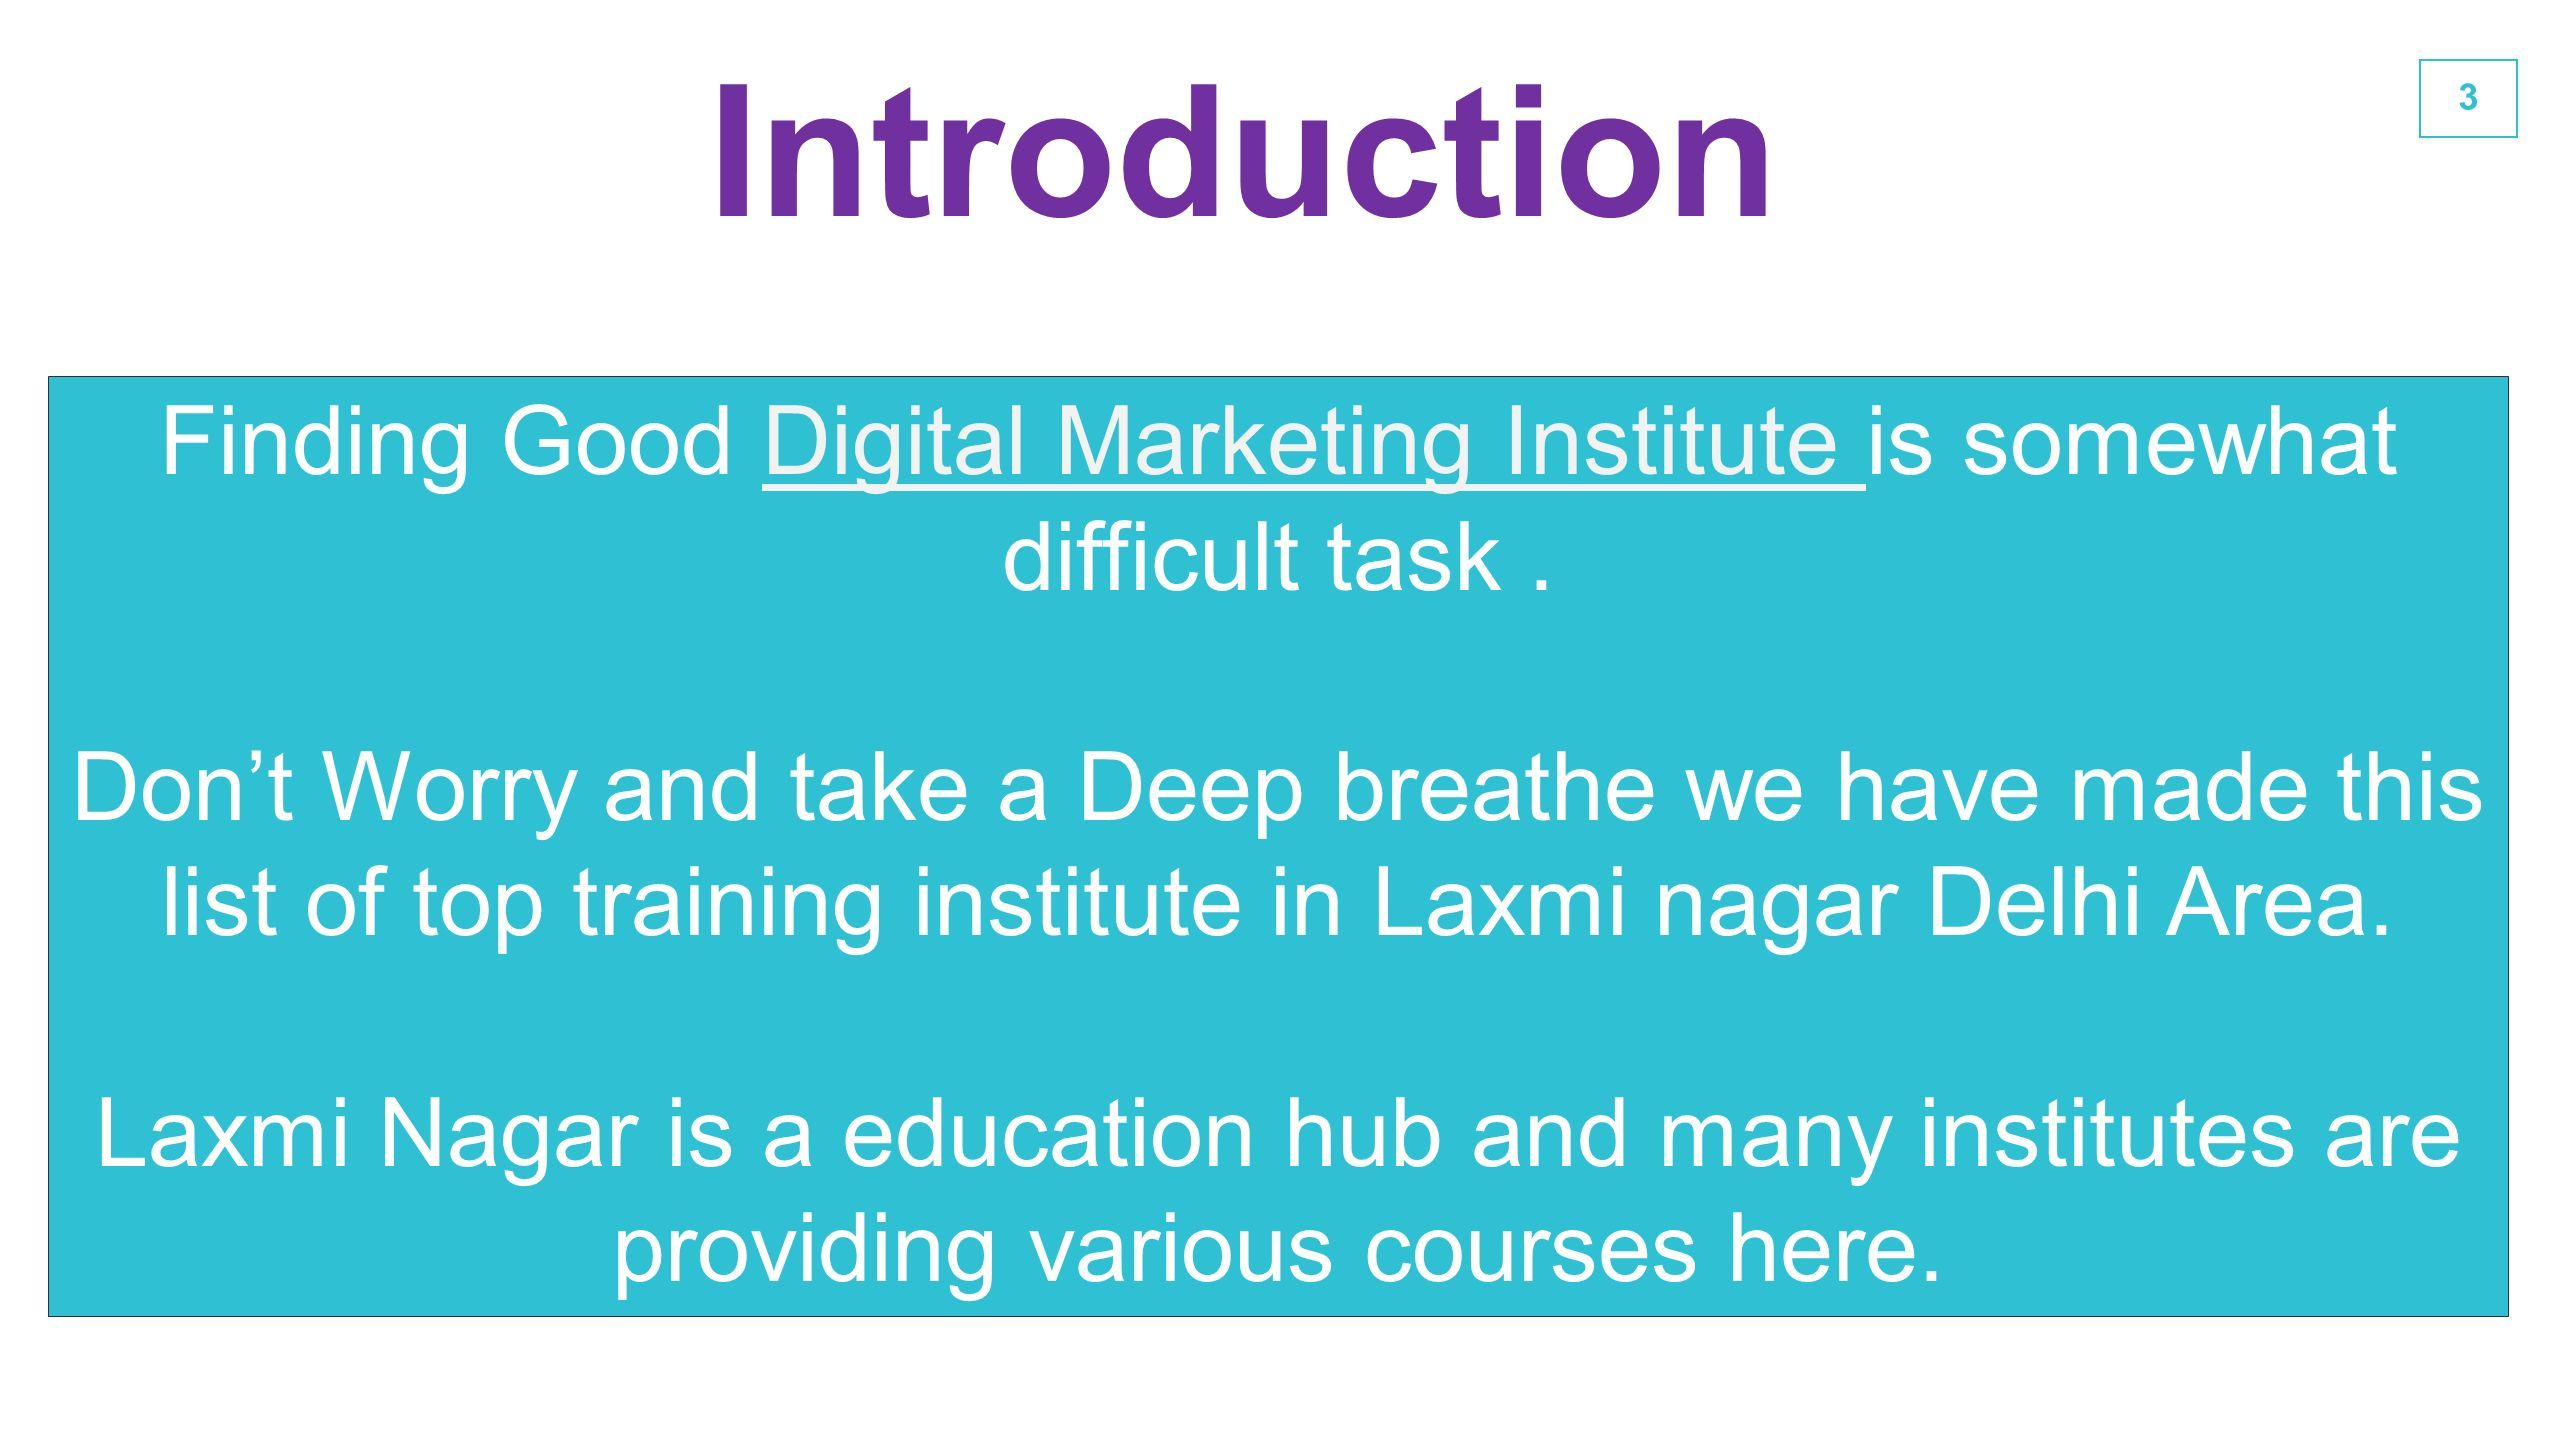 3 Introduction Finding Good Digital Marketing Institute is somewhat difficult task.Digital Marketing Institute Don’t Worry and take a Deep breathe we have made this list of top training institute in Laxmi nagar Delhi Area.